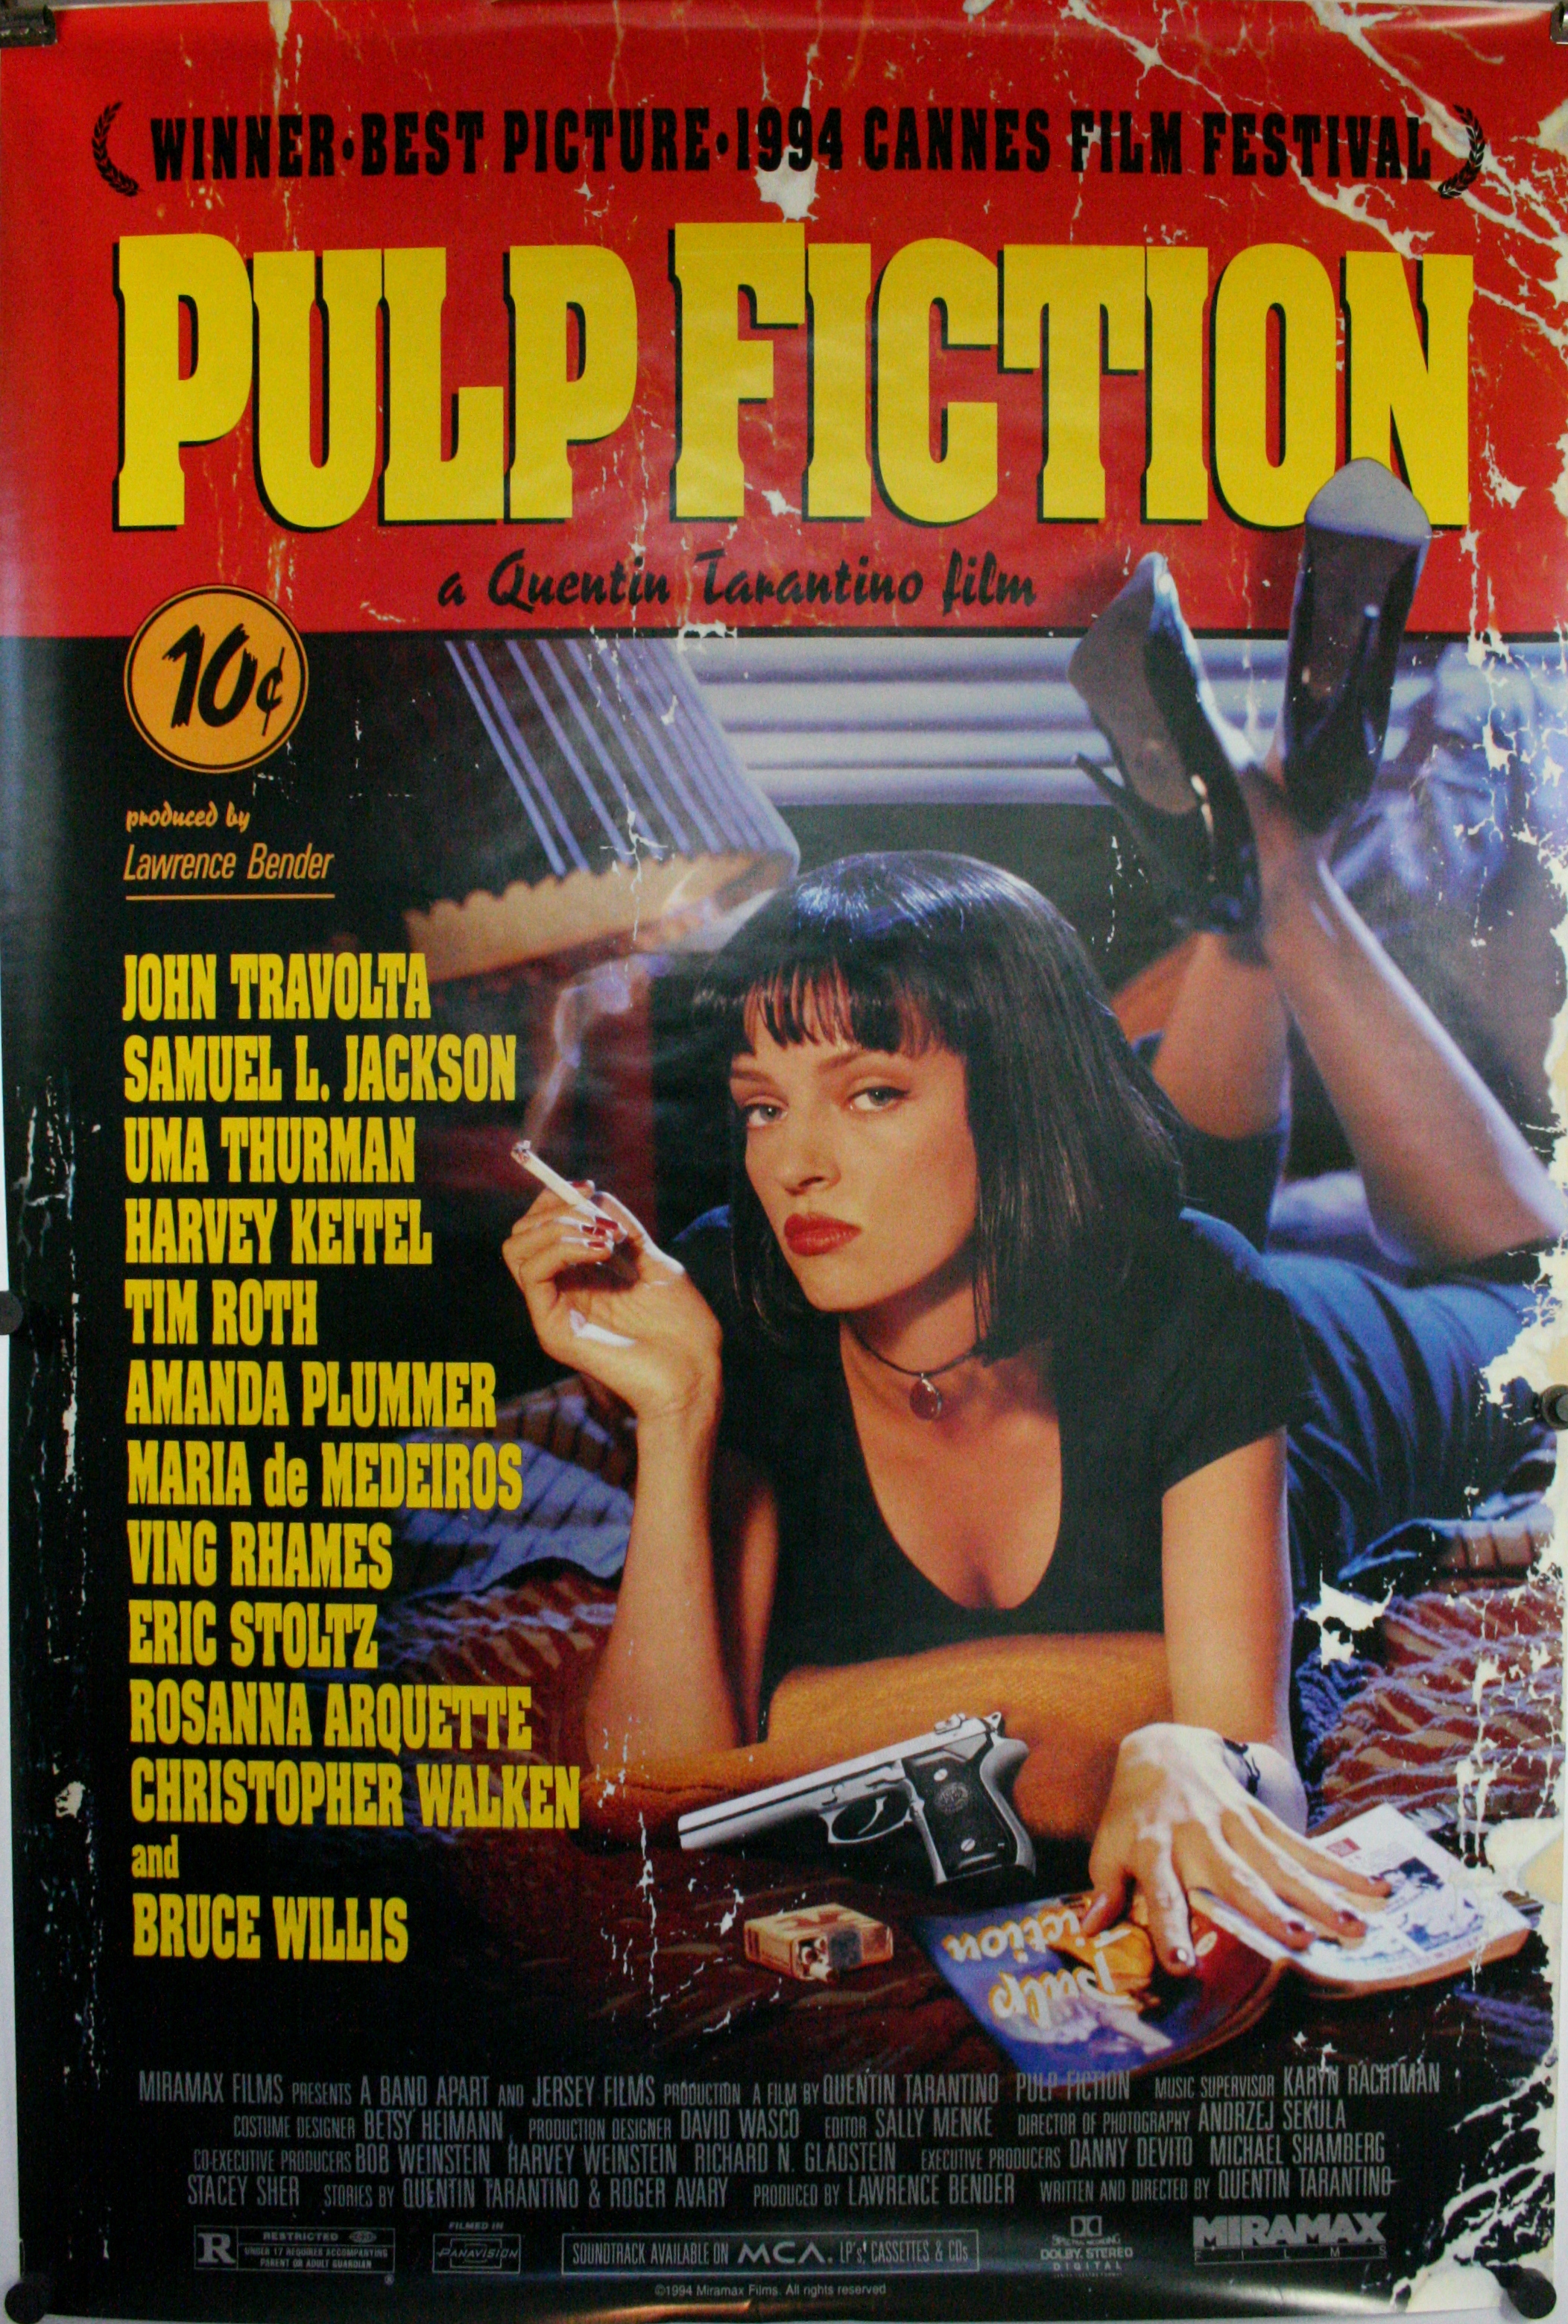 Pulp Fiction (1994) Rare Poster by Rare Cinema Collection